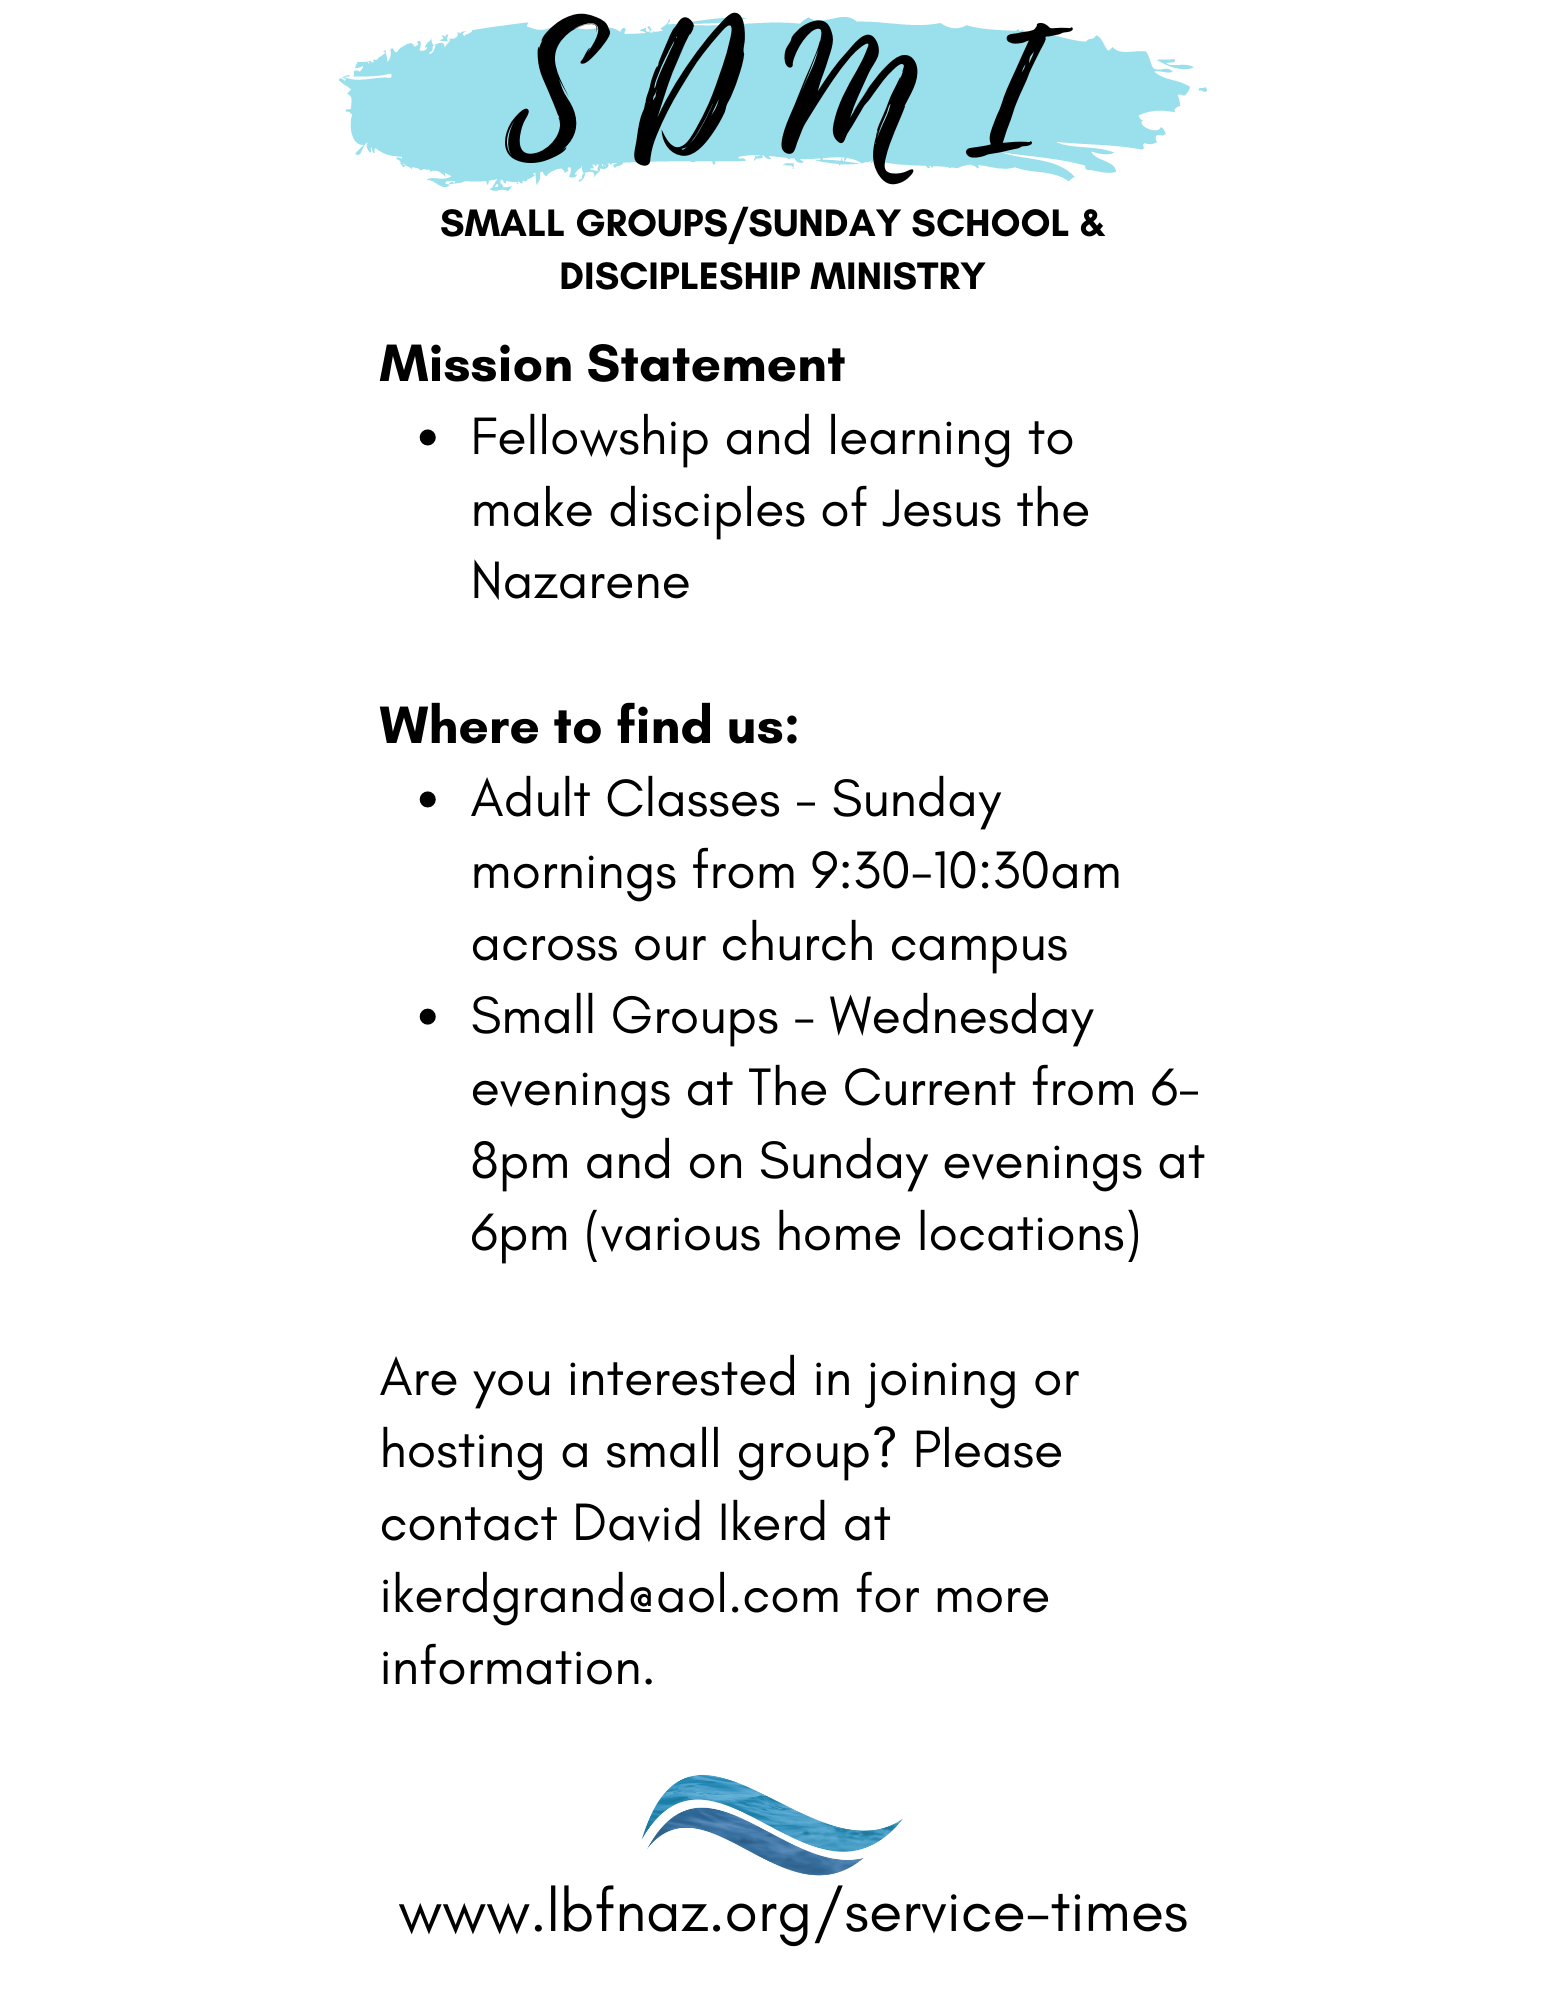 website ministry image - SDMISmall Groups.png